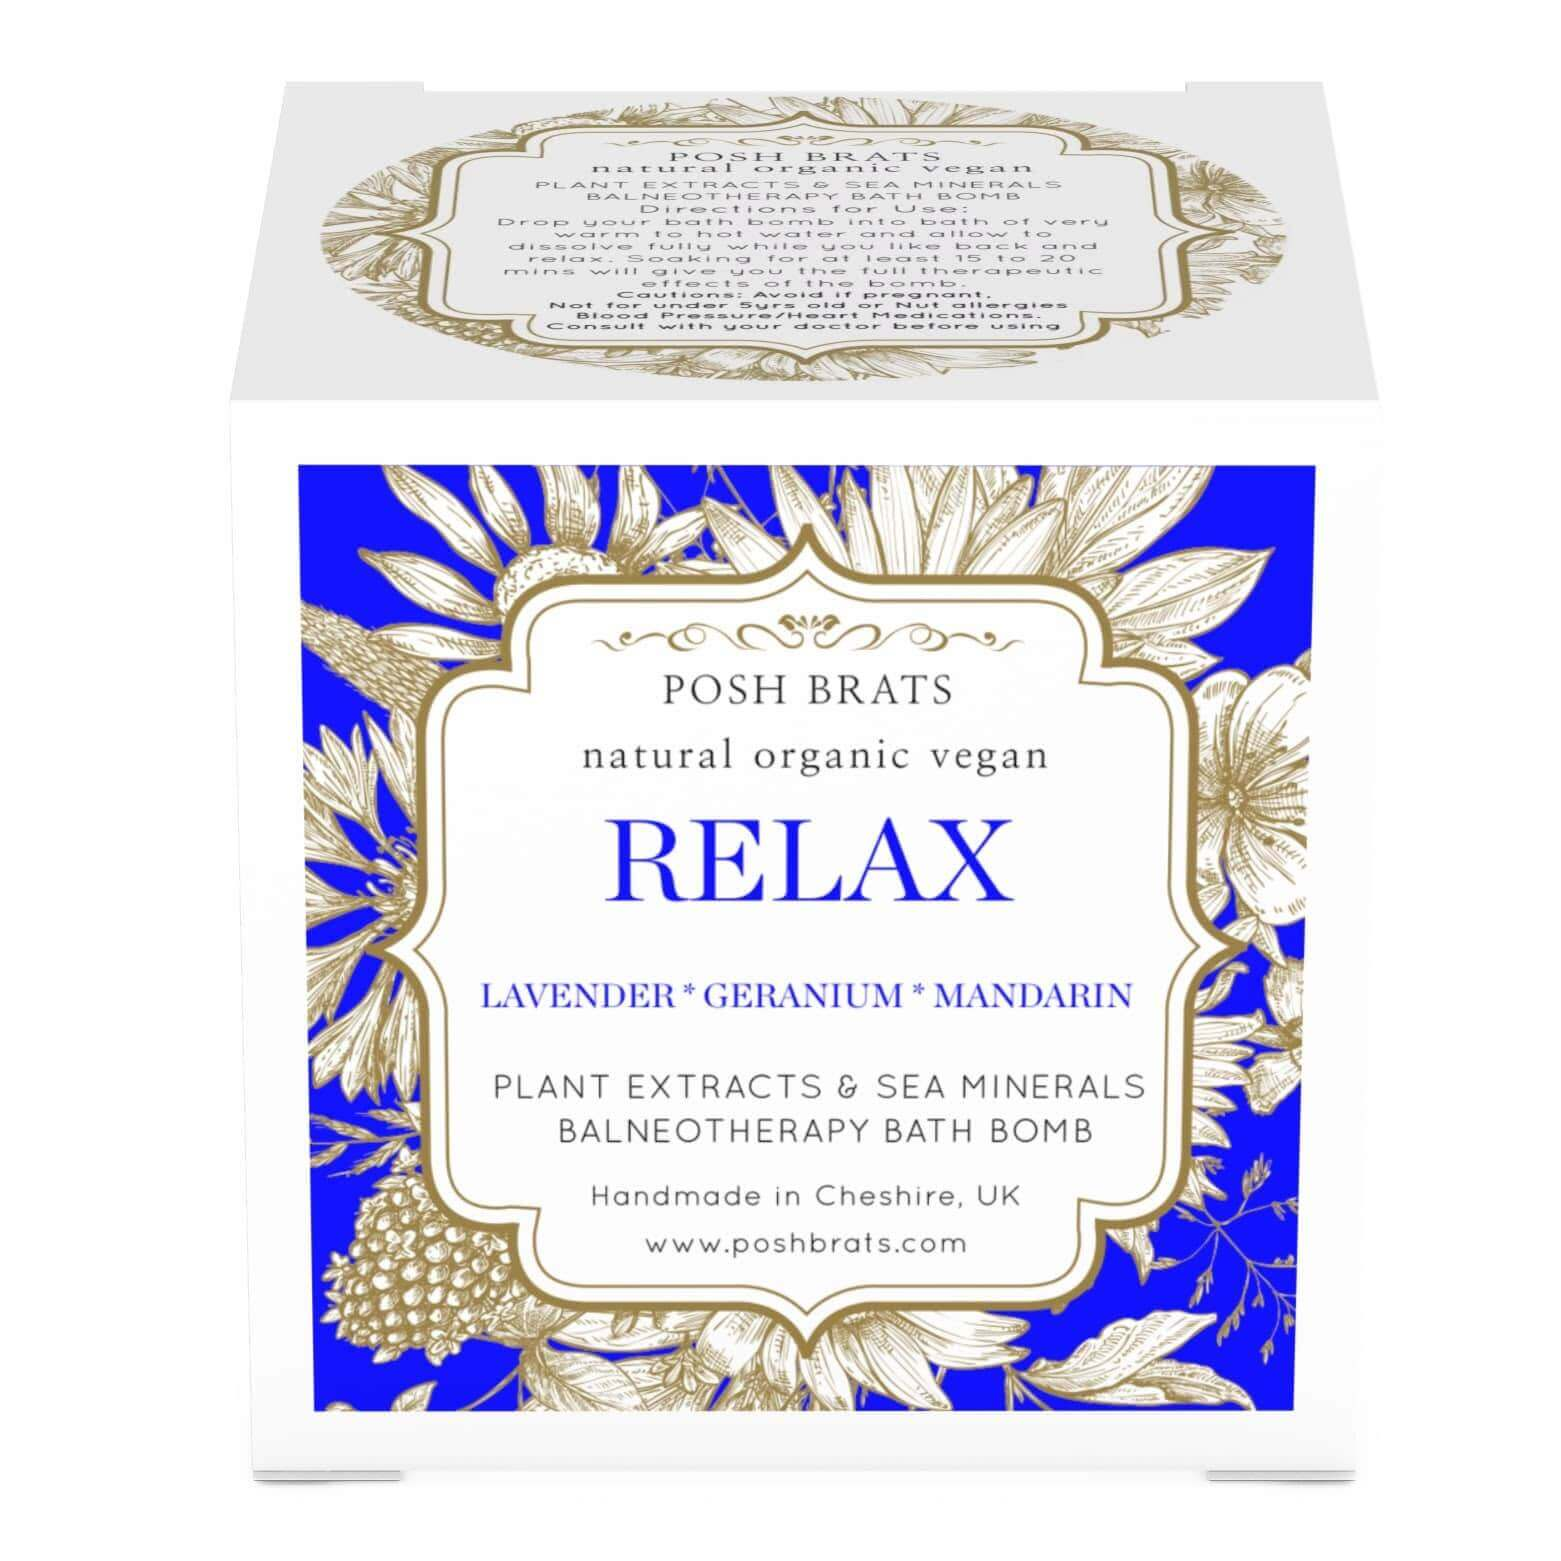 Enjoy a relaxing bath like never before with our Relax Aromatherapy Bath Bomb. It's pure bliss for mind and body.